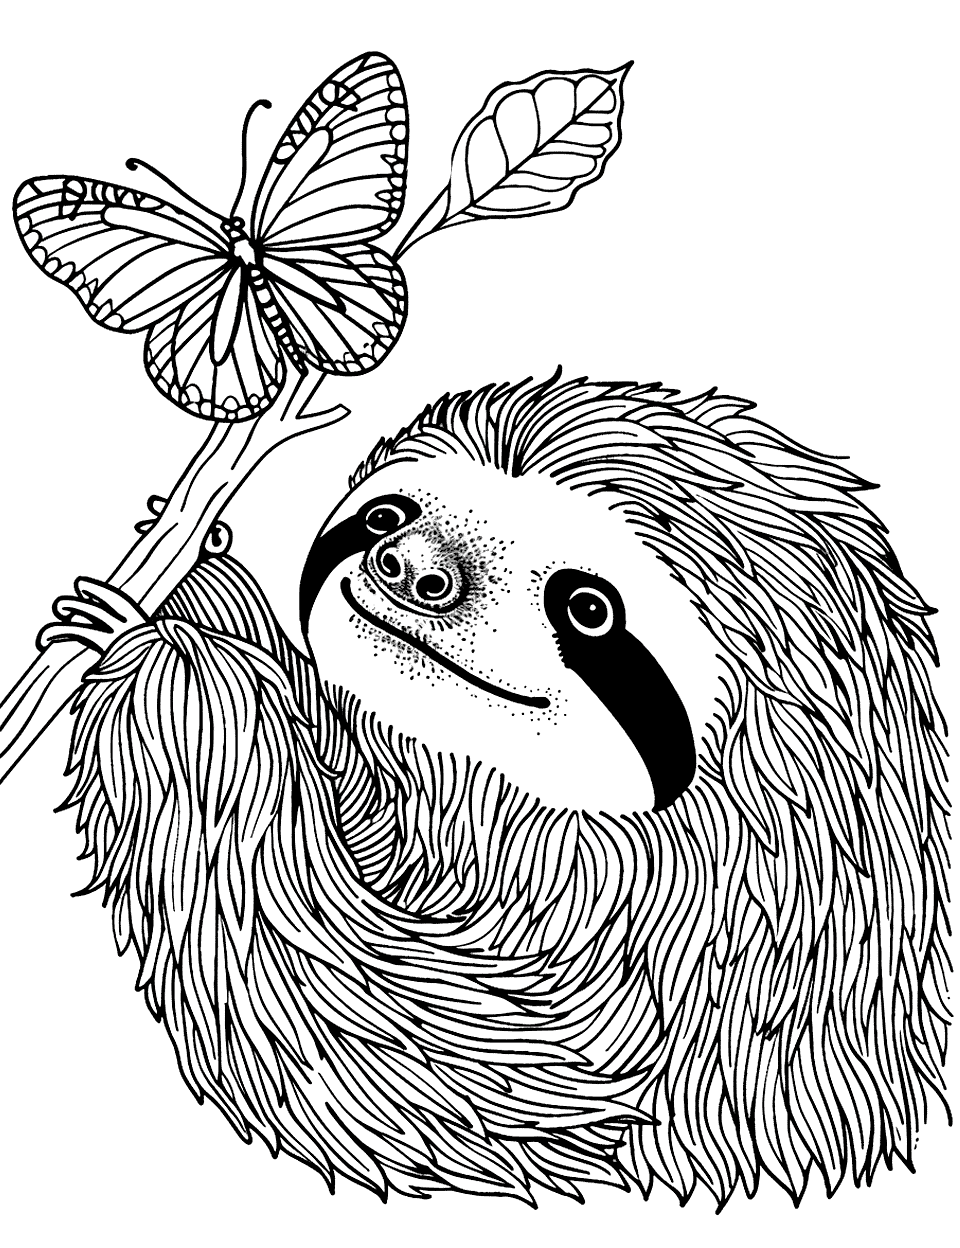 Sloth with a Butterfly Coloring Page - A delightful scene where a sloth is looking at a butterfly.